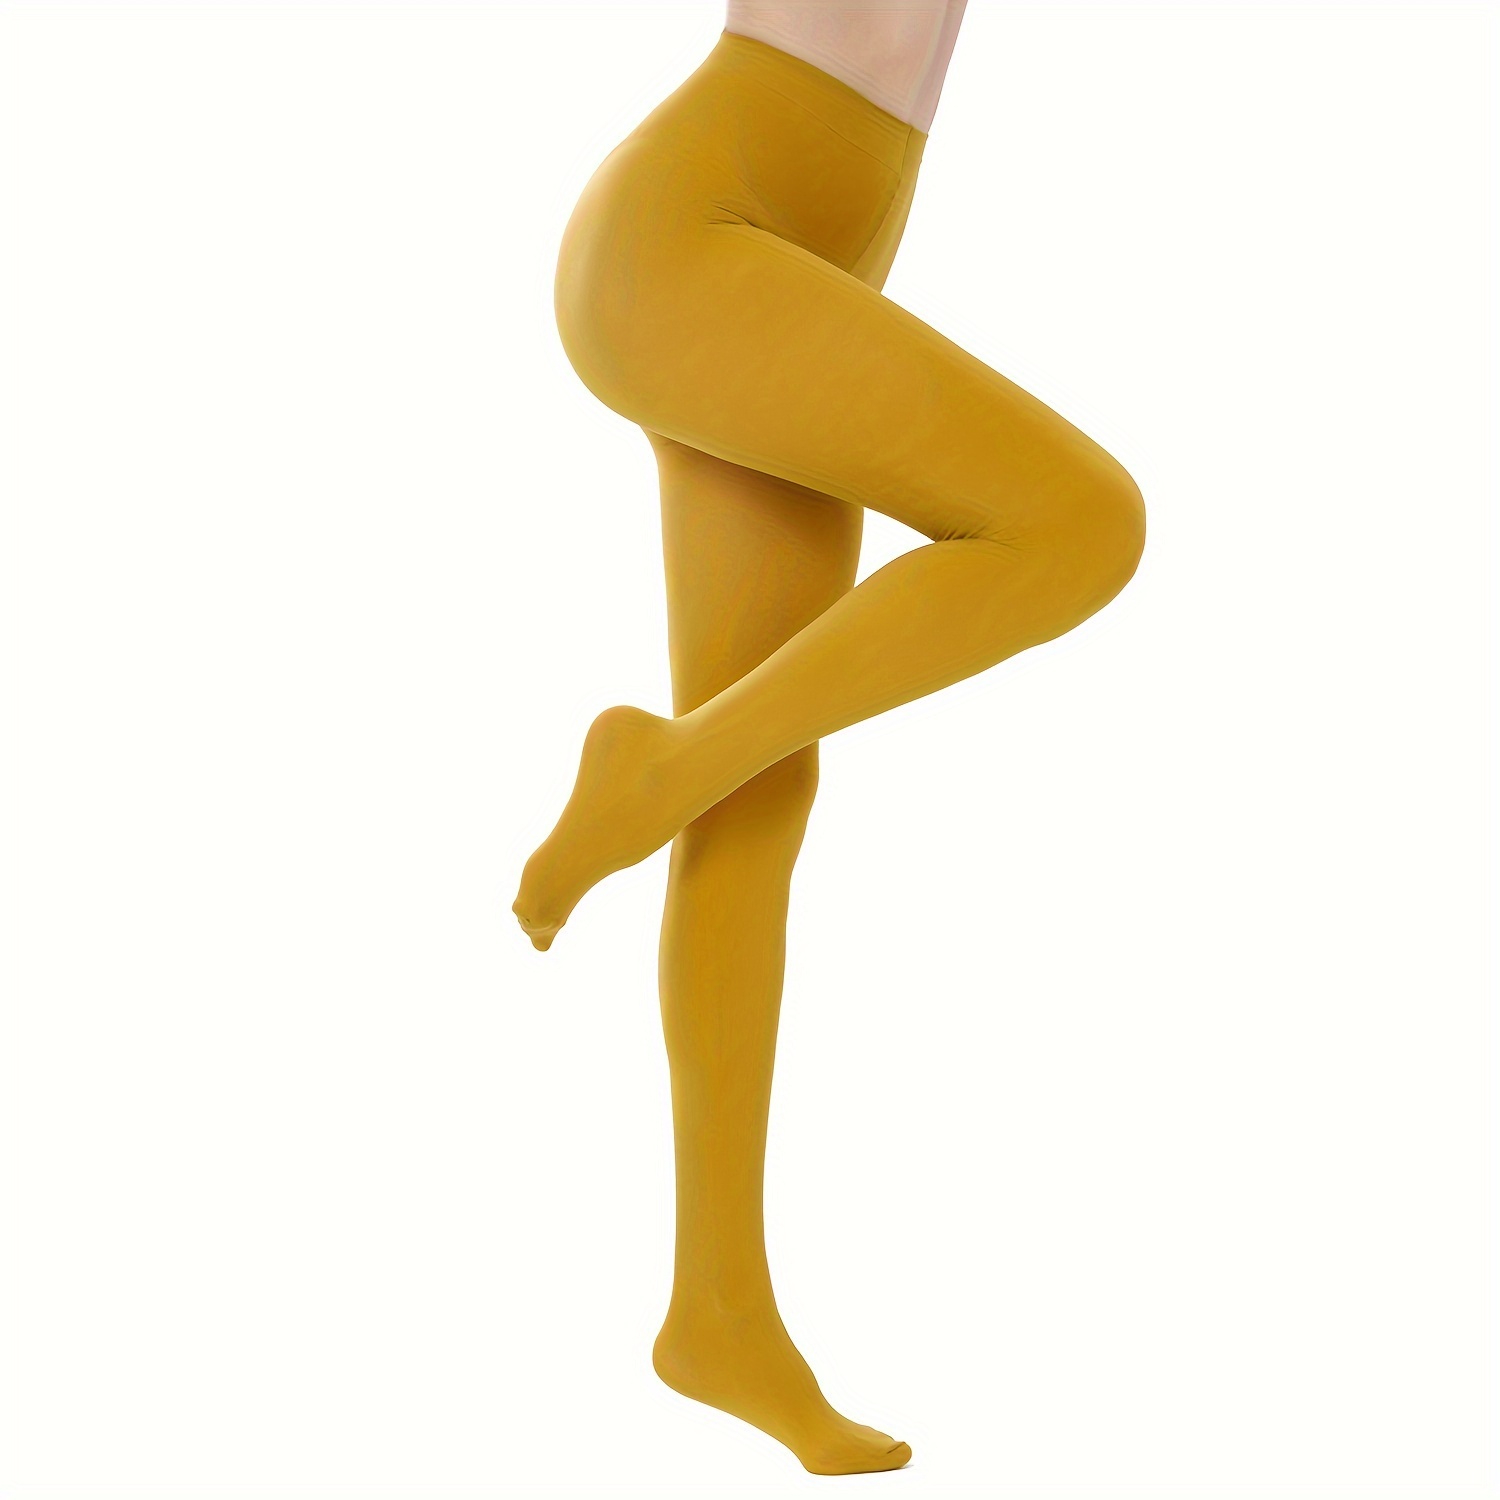 Yellow Tights for Women Soft and Durable Opaque Pantyhose Tights